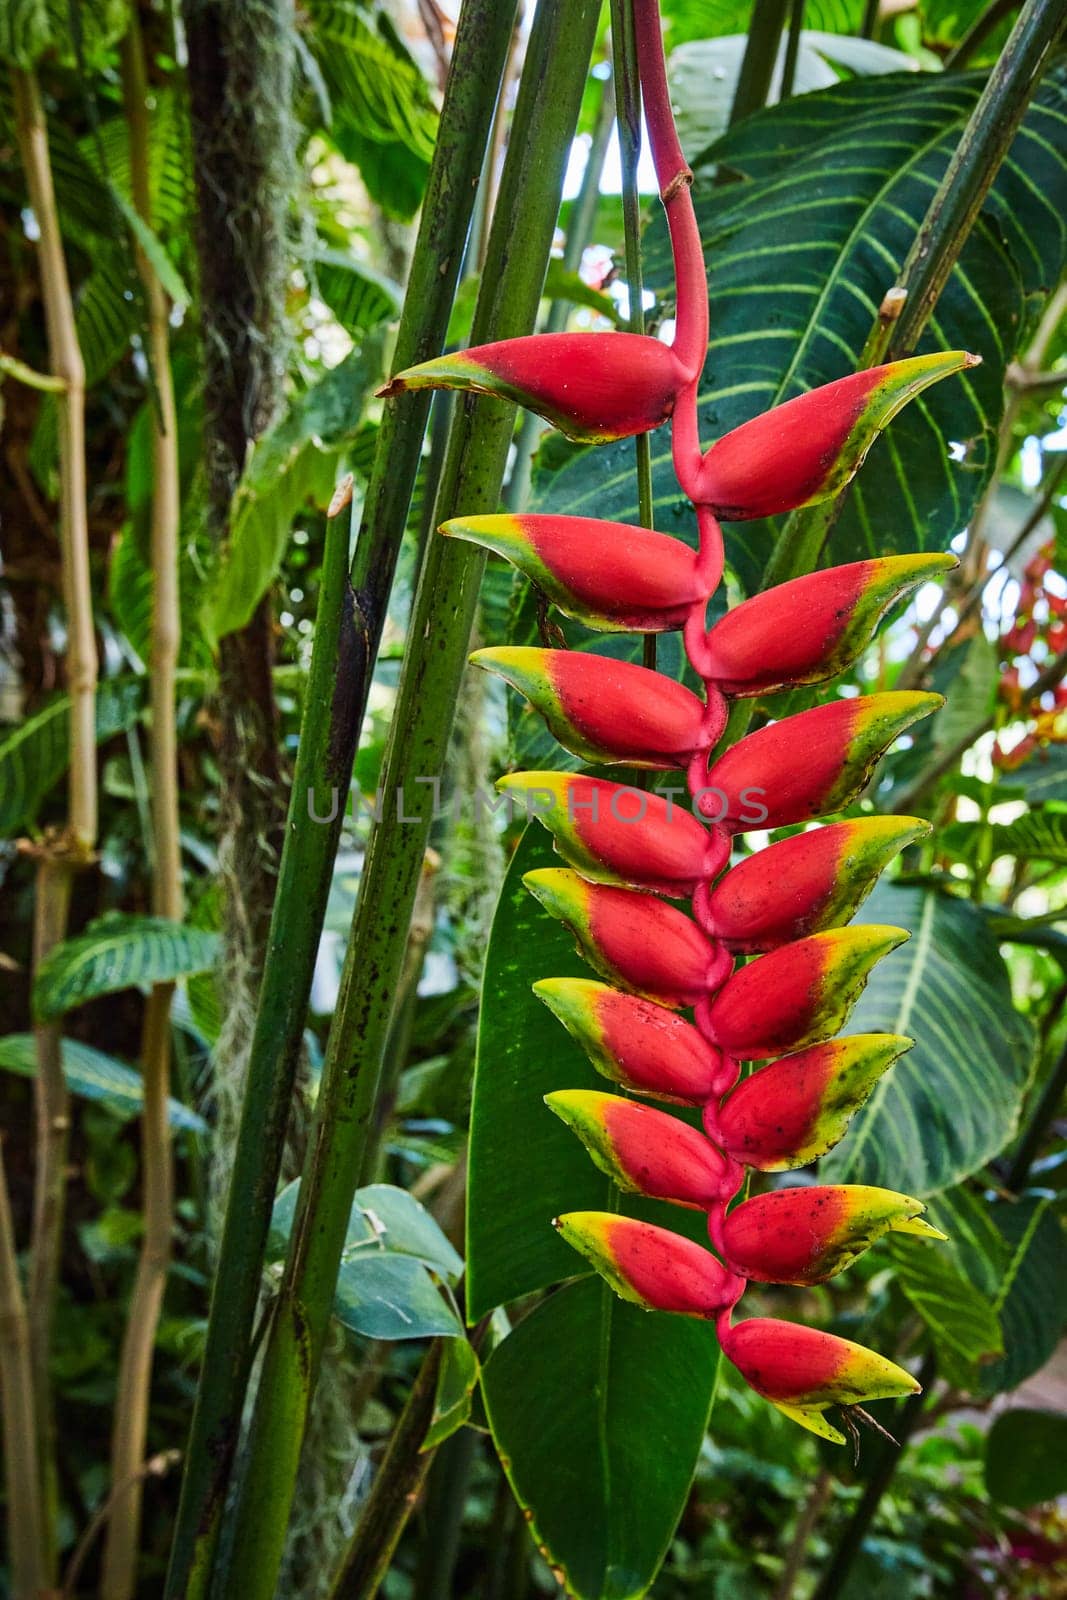 Vibrant Heliconia Flower in Lush Greenhouse Setting by njproductions